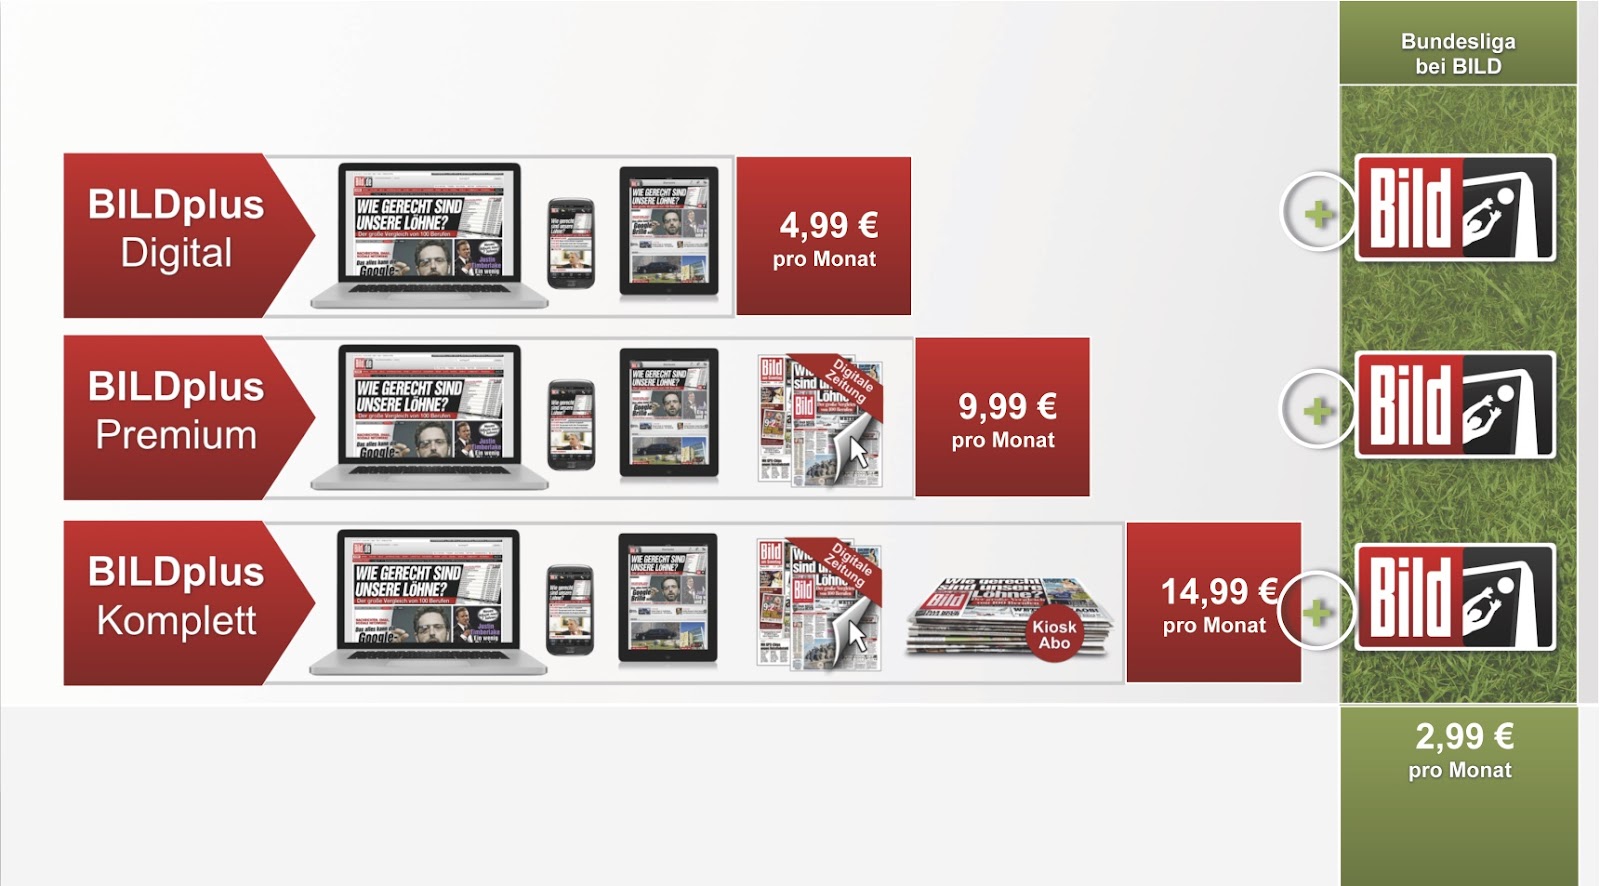 Bild’s subscription offer evolution proves business strategies are meant to be challenged. Also, keep it simple - The Fix